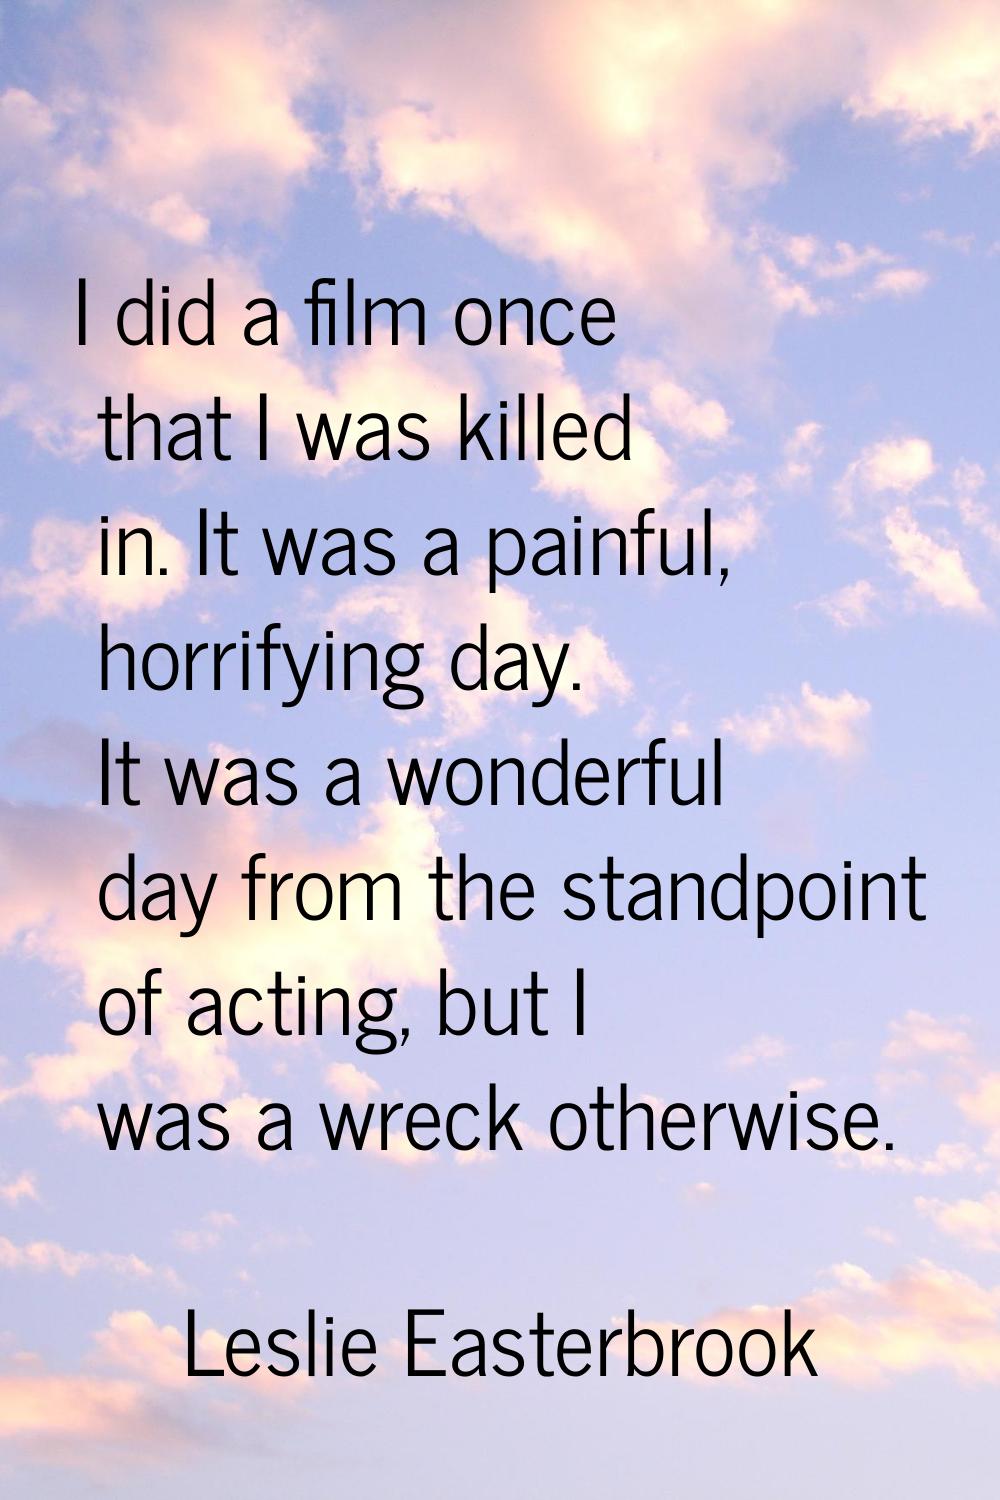 I did a film once that I was killed in. It was a painful, horrifying day. It was a wonderful day fr